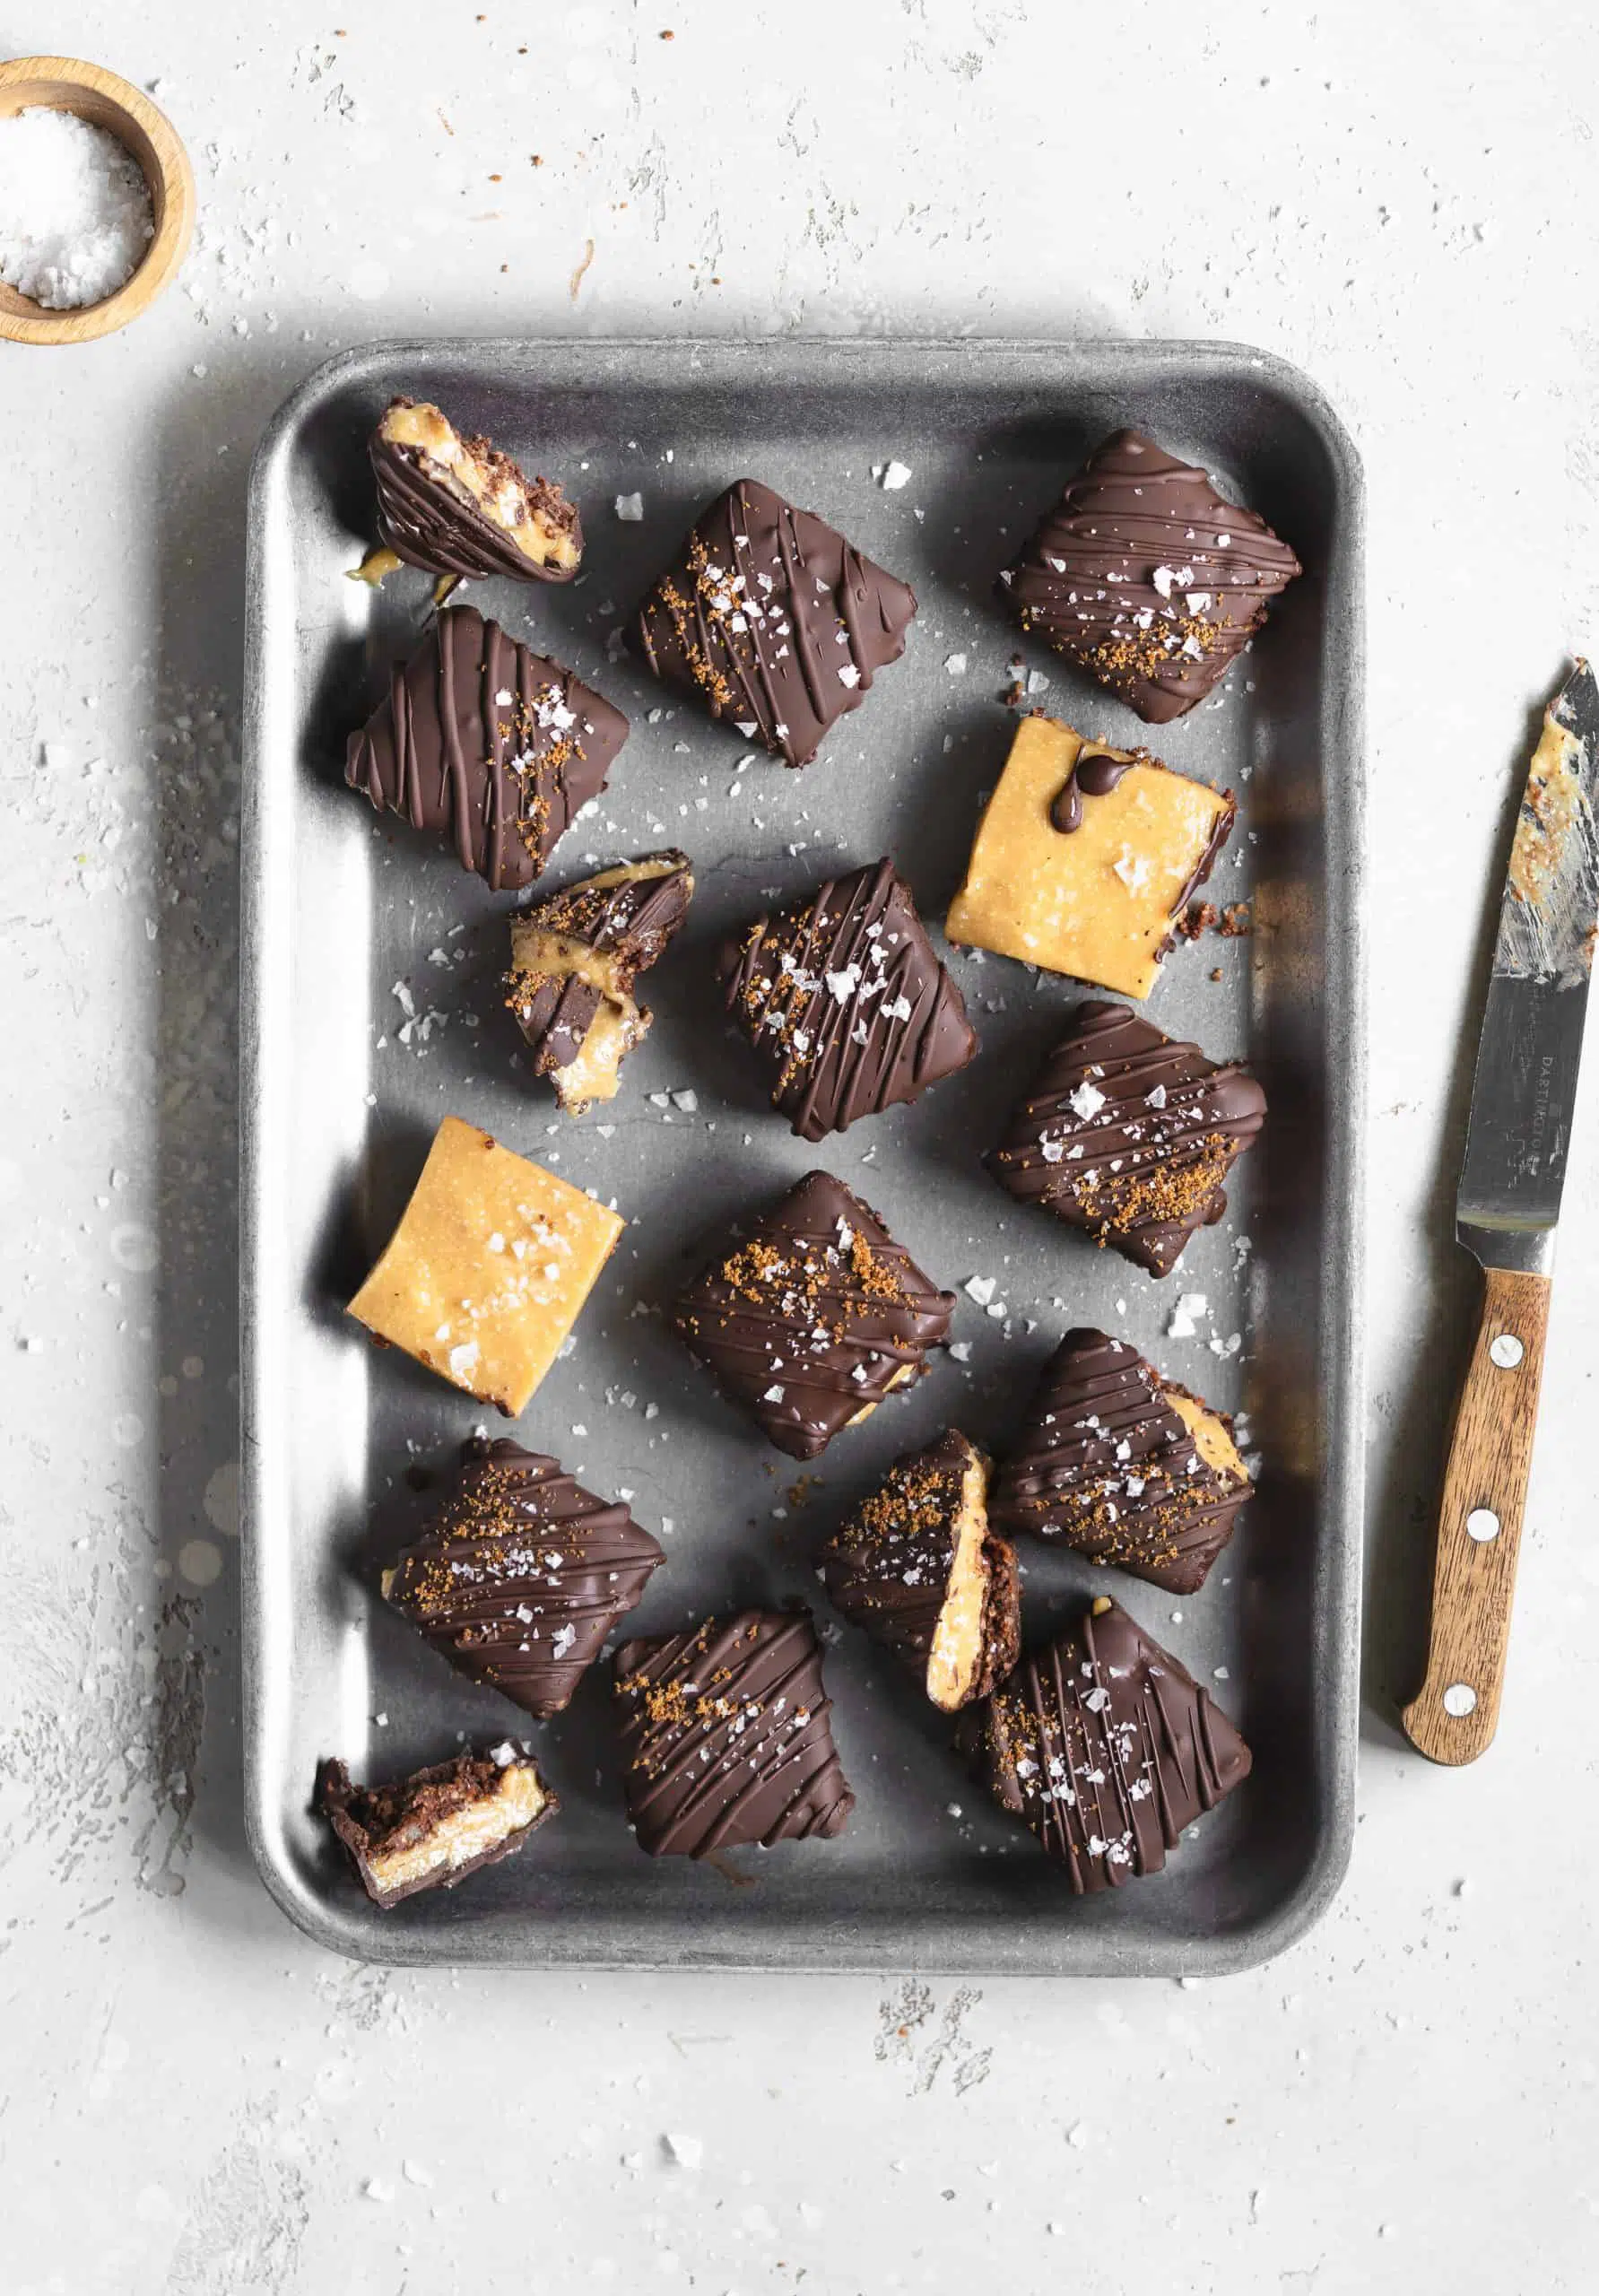 Salted caramel brownie bites on silver tray